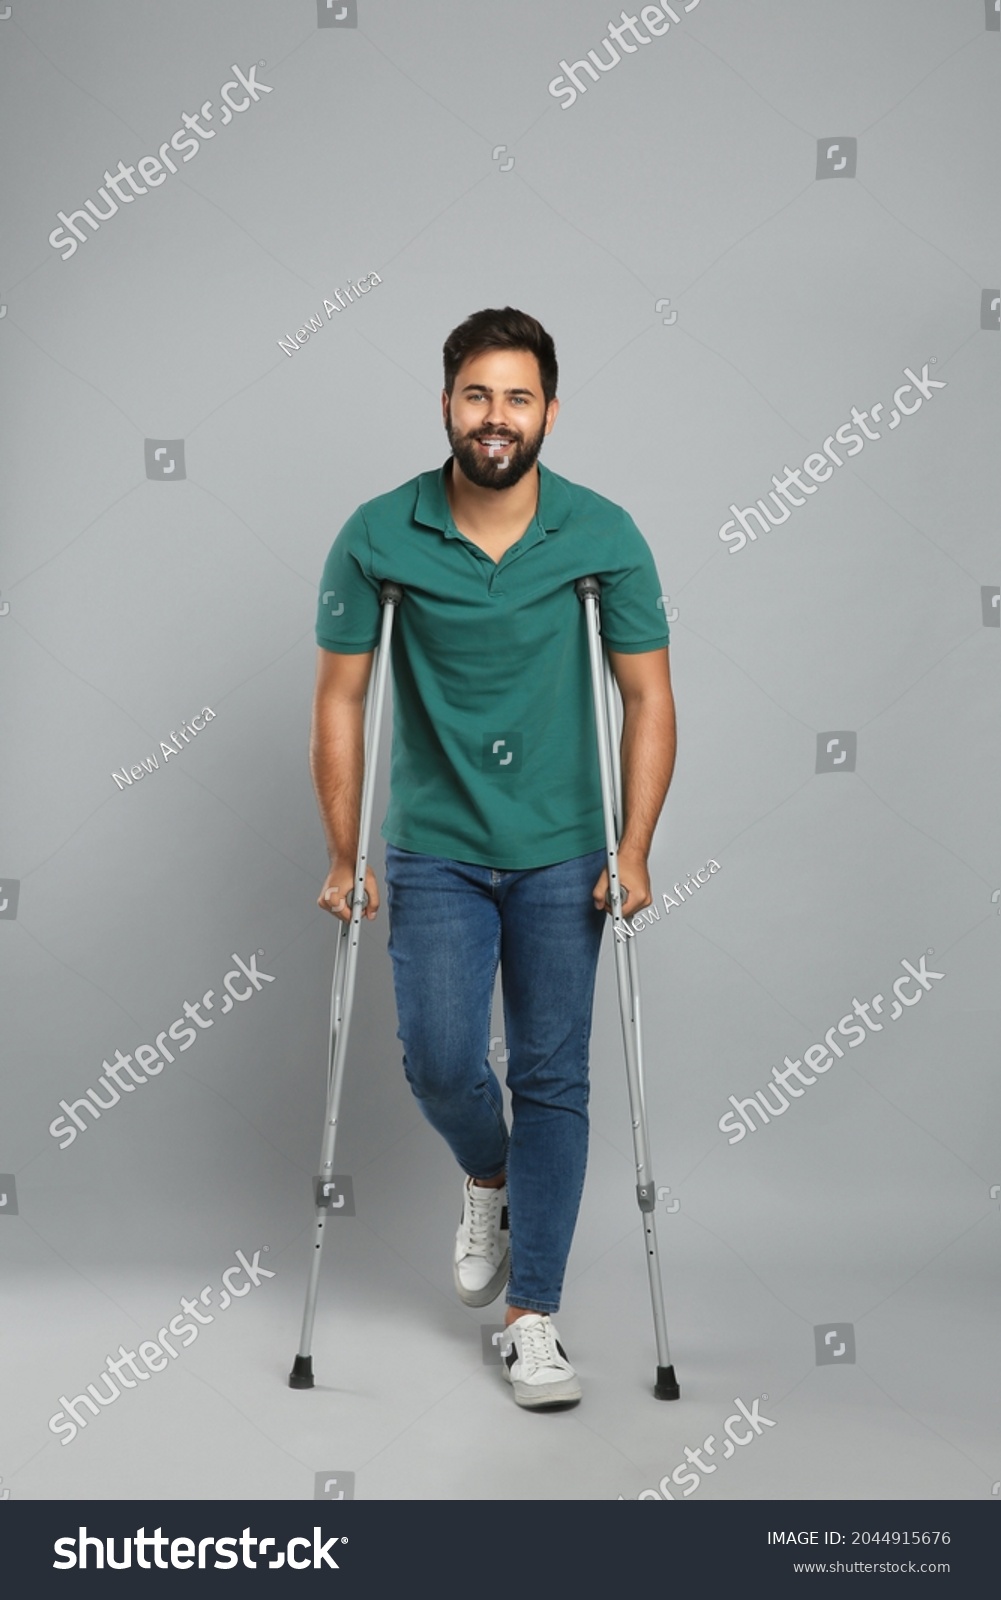 Young man with axillary crutches on grey background #2044915676